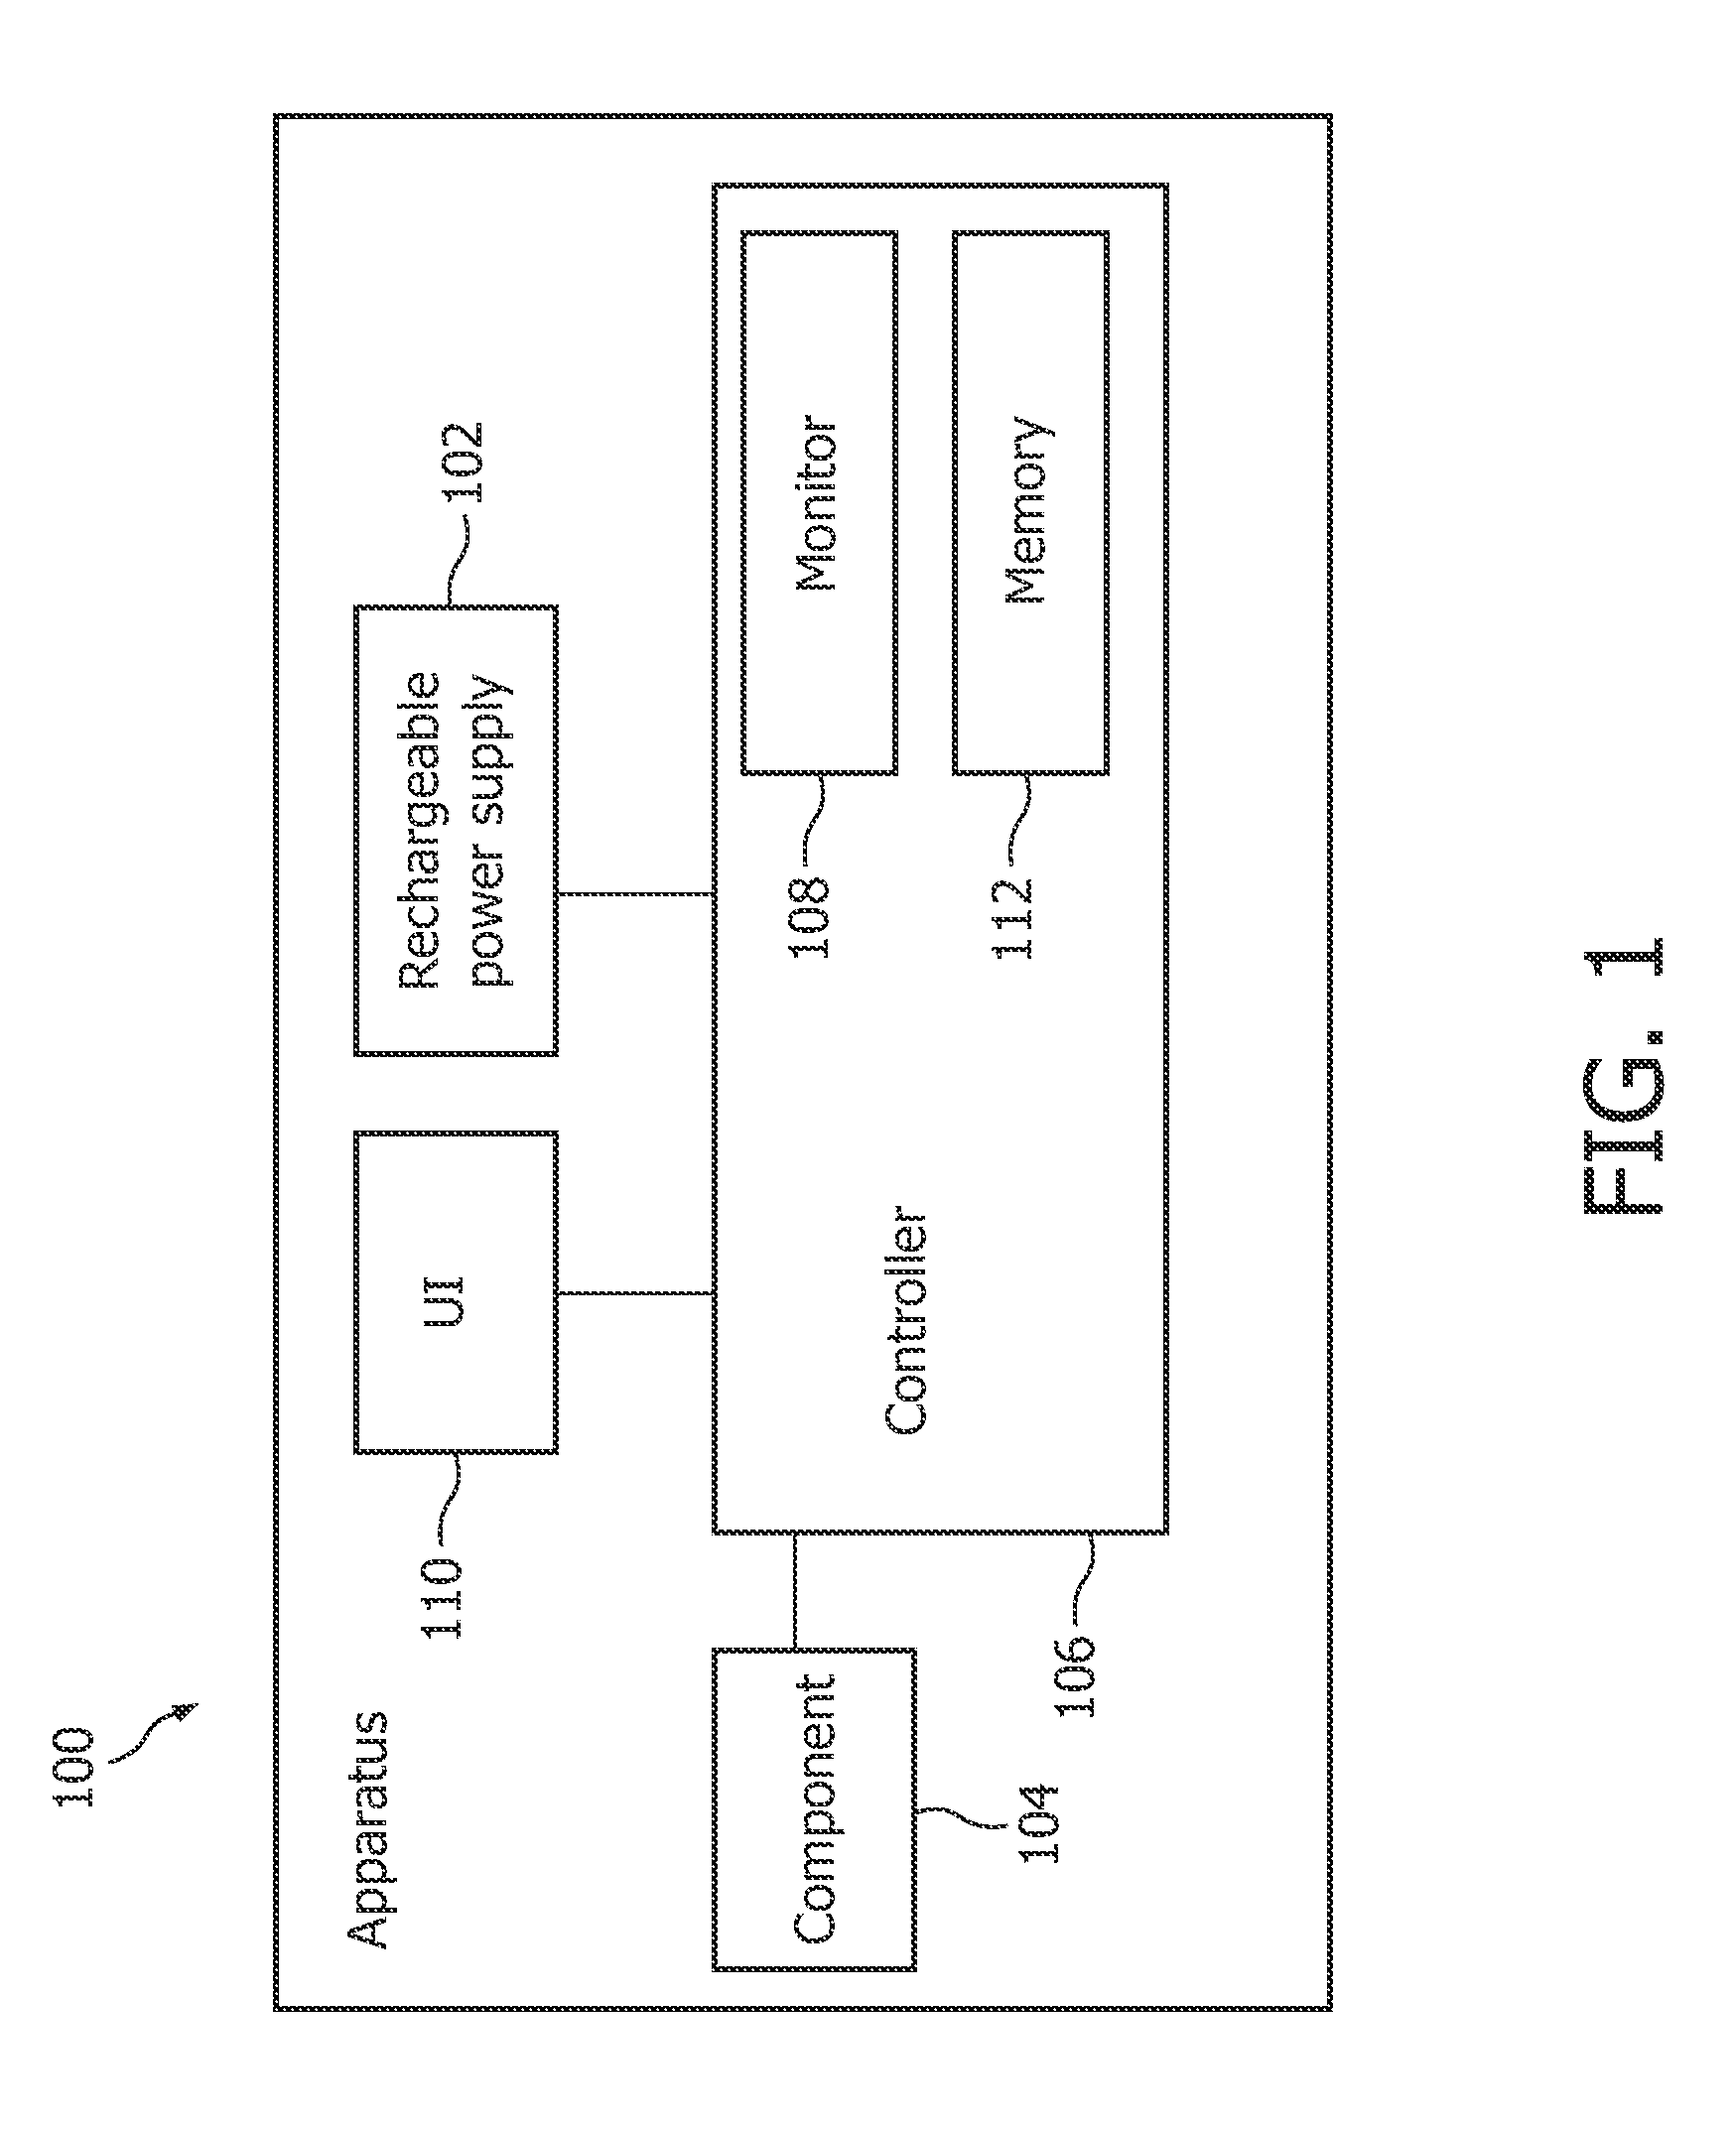 Apparatus with rechargeable power supply